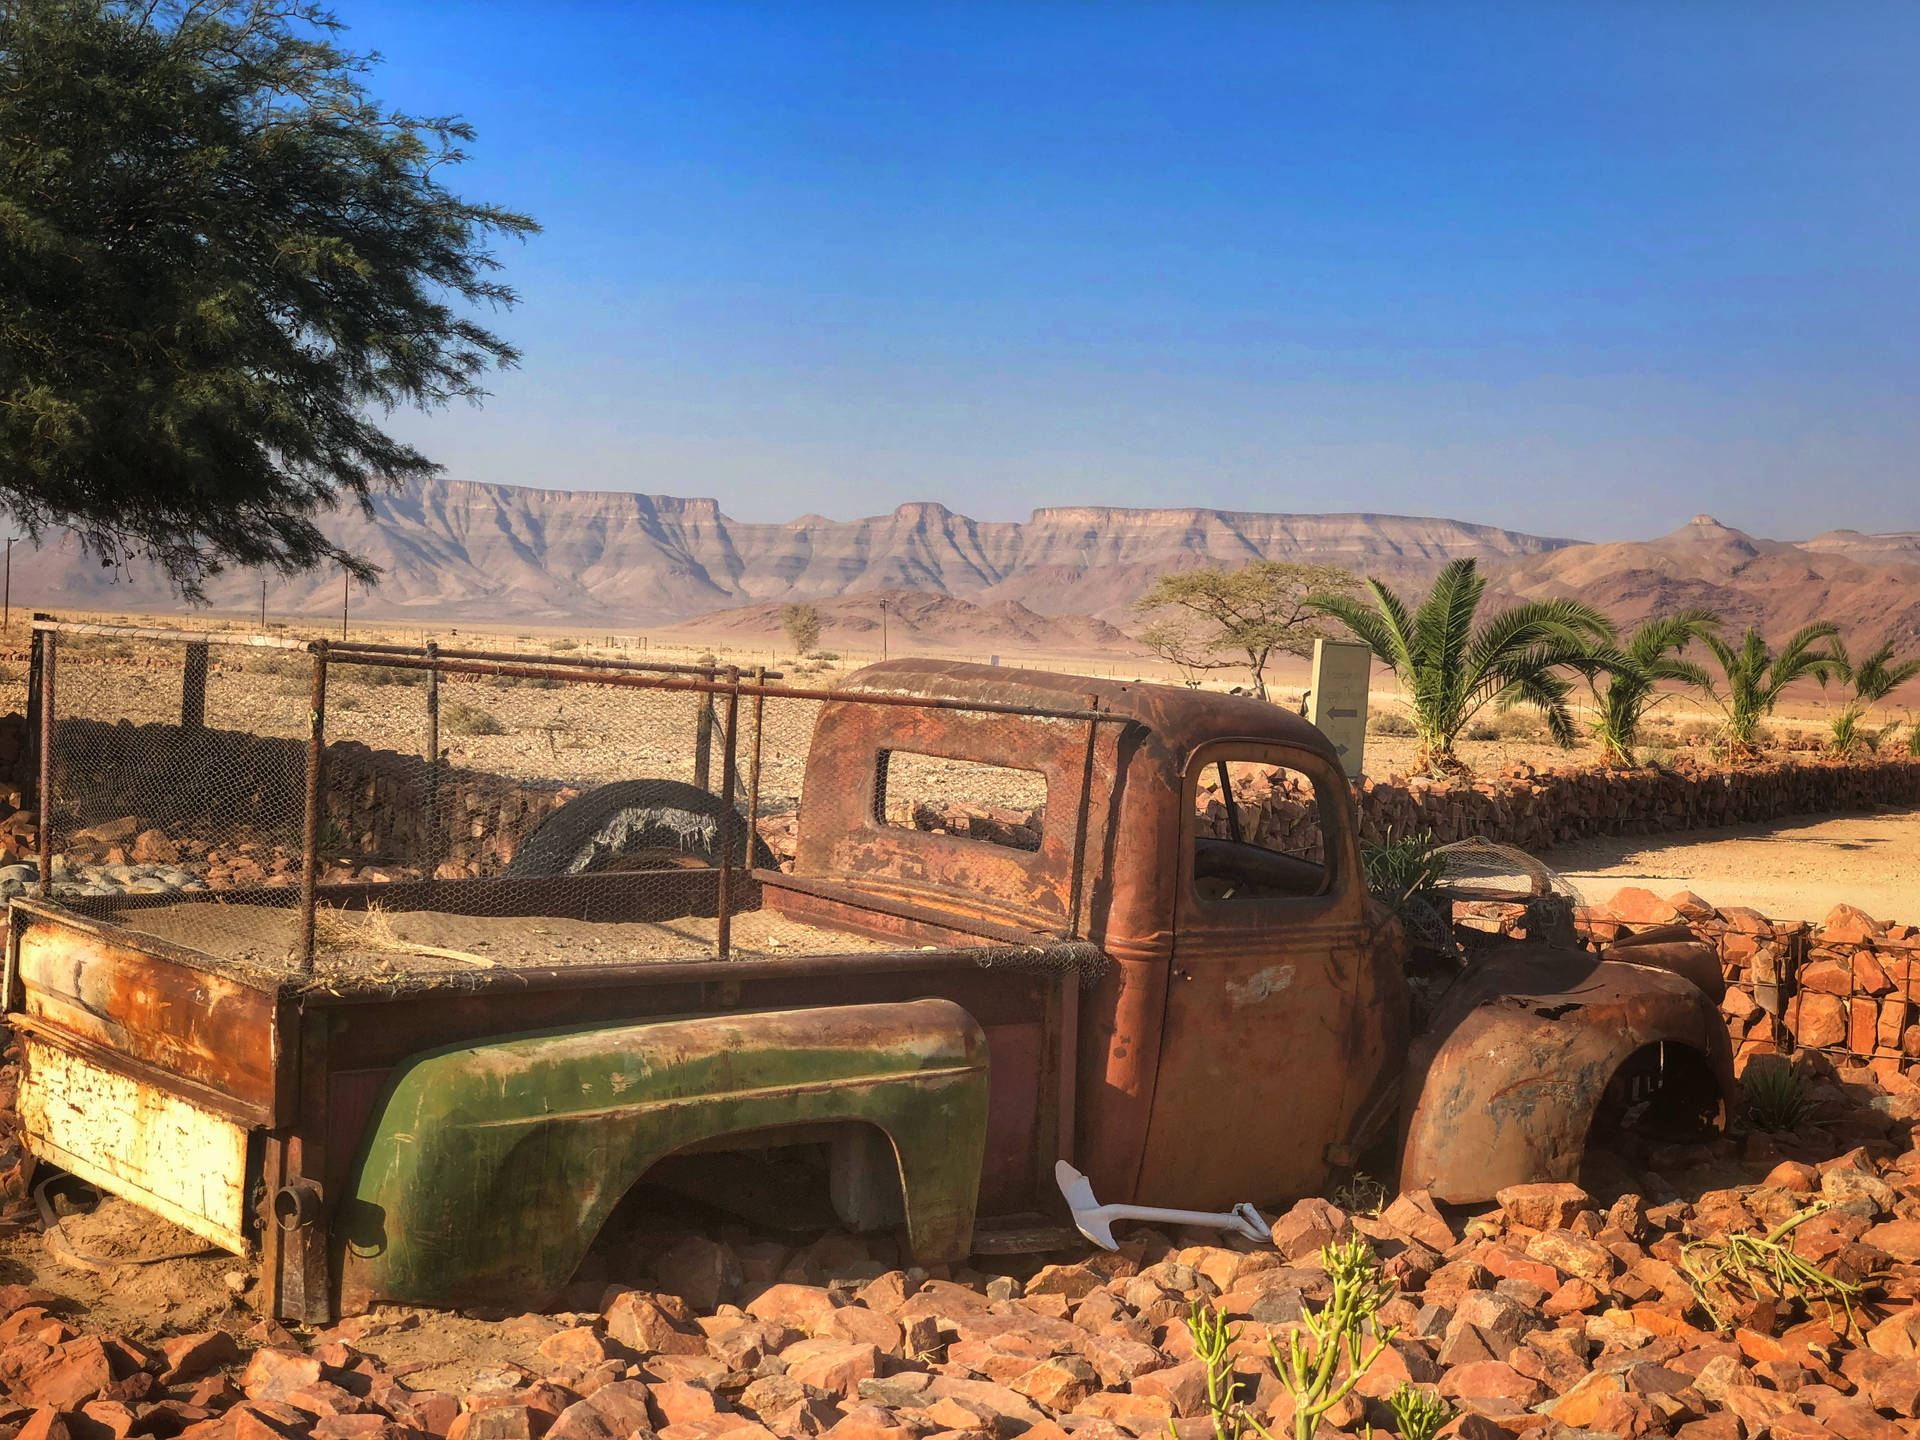 Rusty Truck In The Desert In Namibia